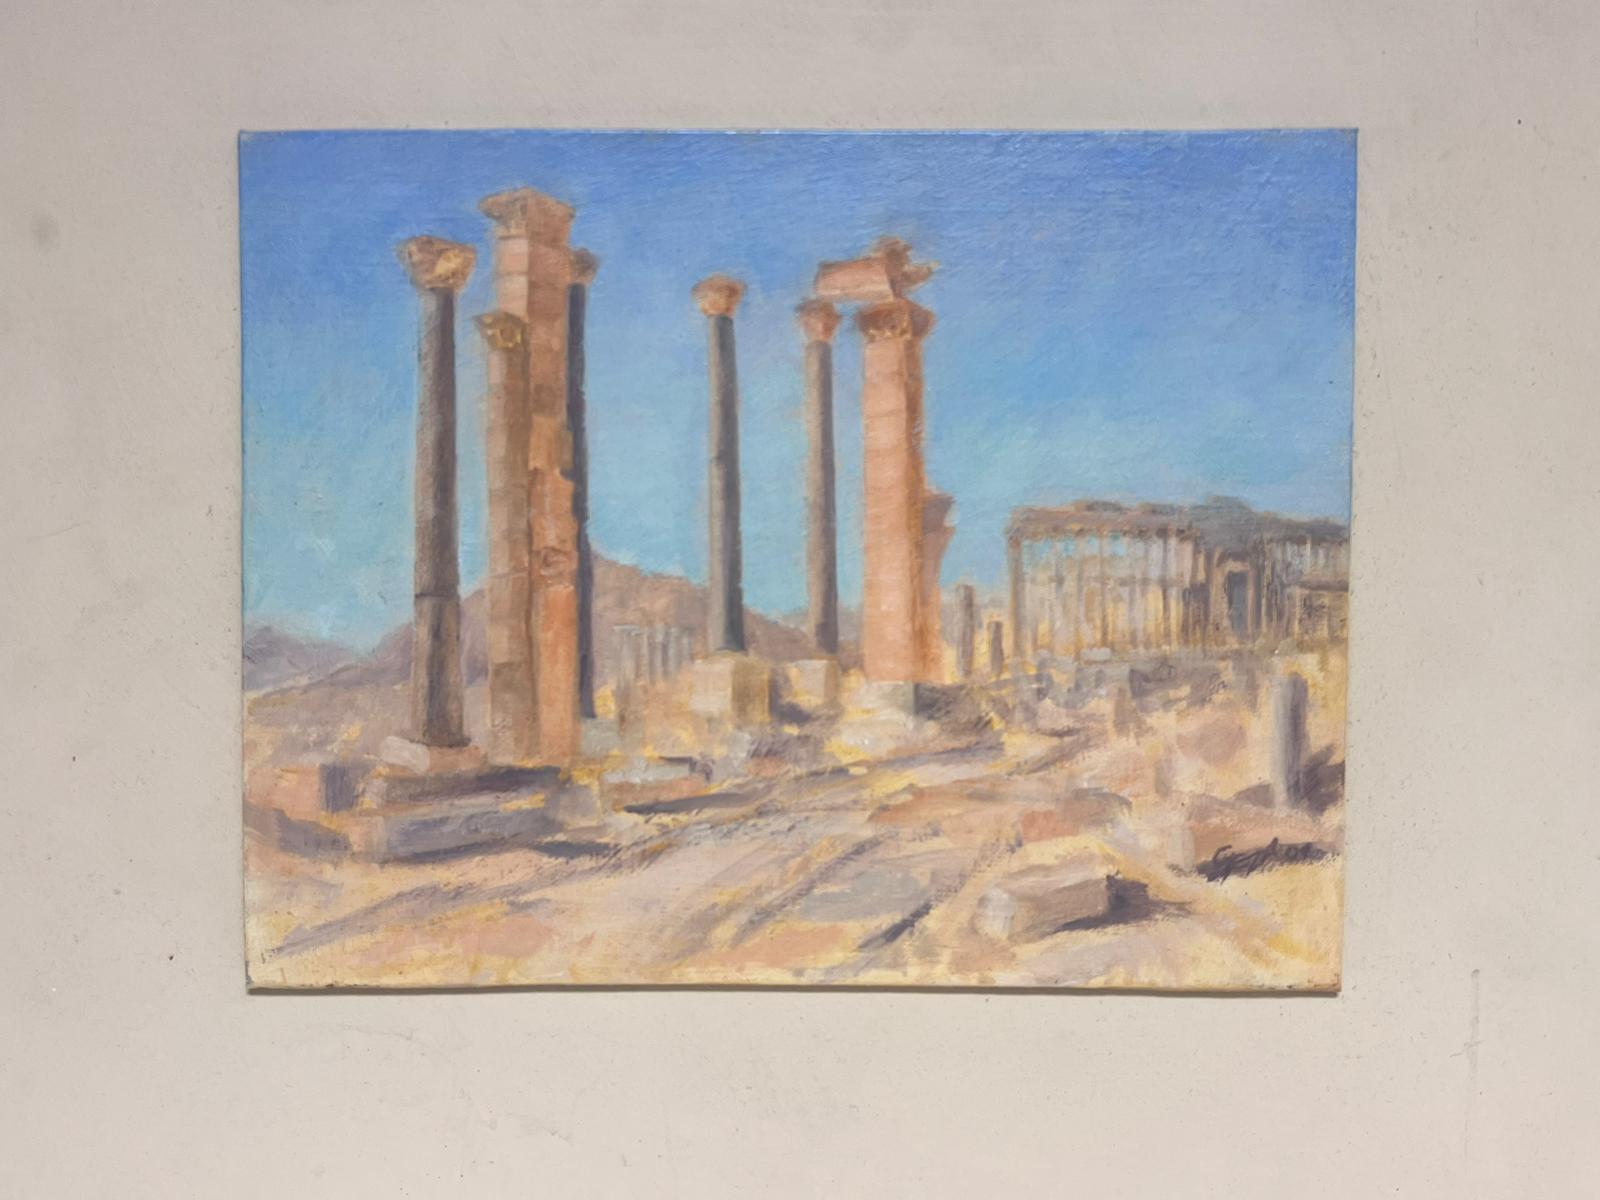 Palmyra, ancient ruins
by Geza Somerset-Paddon (British 20th century)
dated 1997
oil painting on board
overall board size: 16 x 18 inches
board: 9.5 x 12 inches
condition: overall very good
provenance: all the paintings we have by this artist have